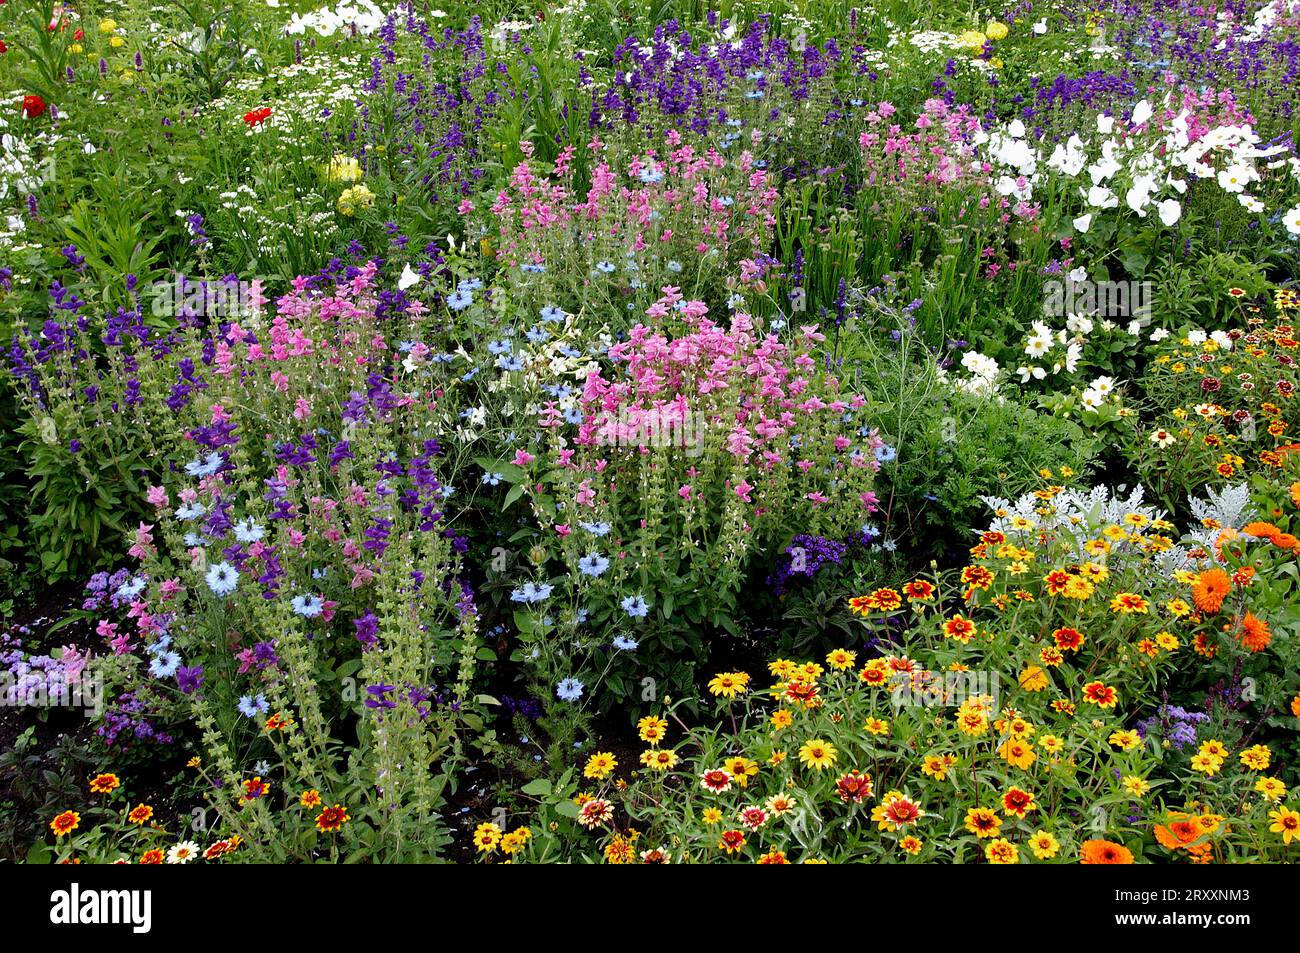 Flowerbed with sunflower, damsel in the vine (Nigella damascena) and annual clary (Salvia horminum) (Helenium hybride), damsel in the vine, black Stock Photo